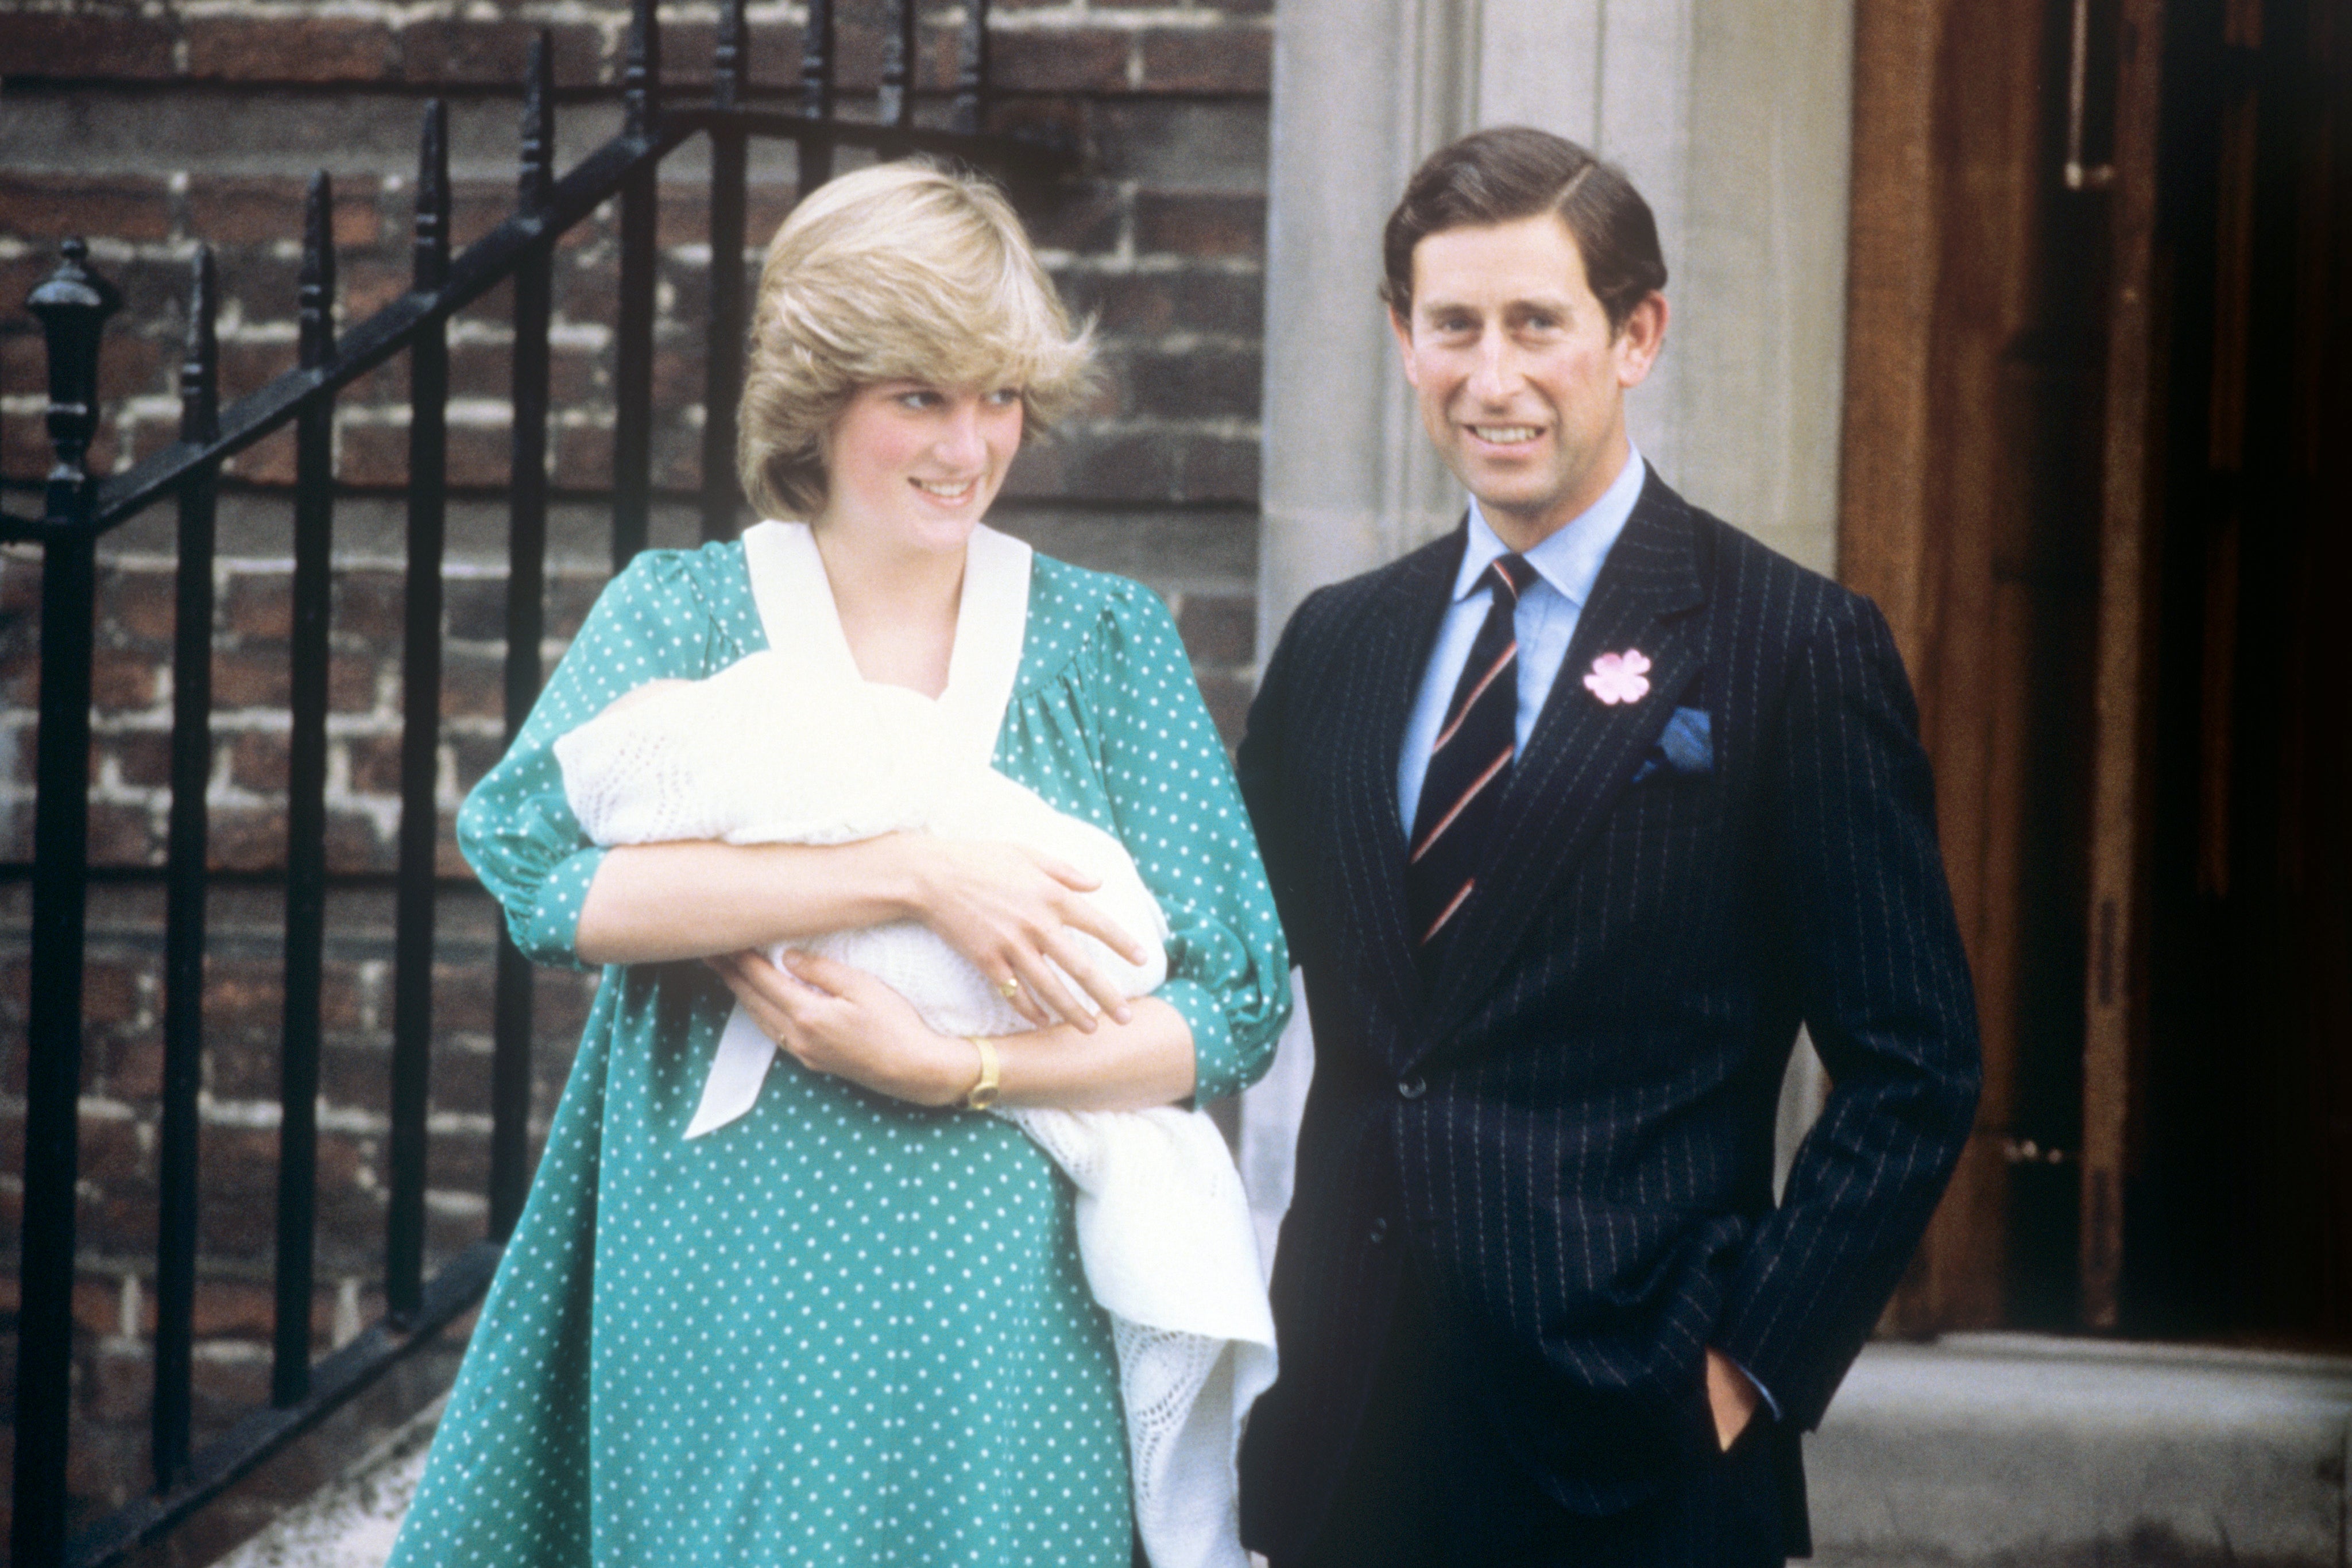 The Prince and Princess of Wales leaving the Lindo Wing at St. Mary’s Hospital after the birth of their baby son, Prince William.